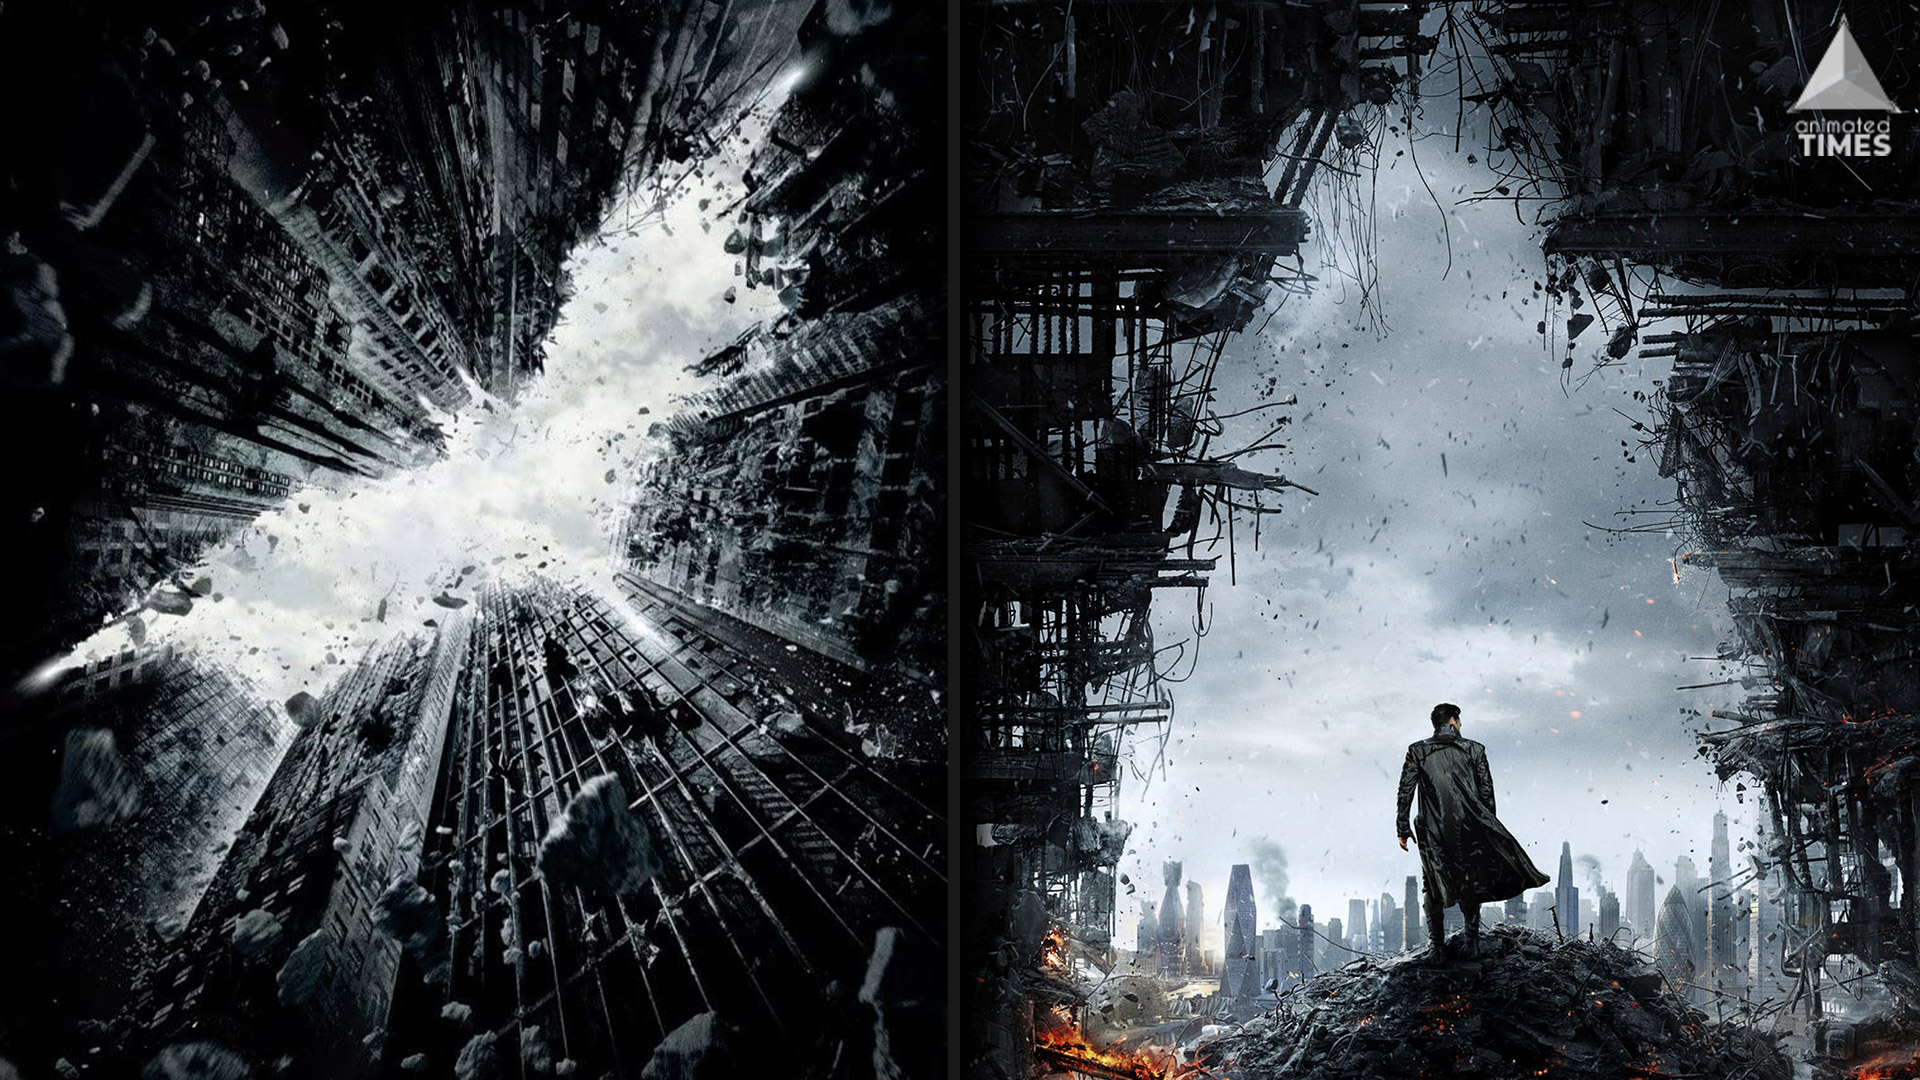 10 Movie Posters That Might Give You That Deja Vu Feeling (Where Have We Seen It Before?)